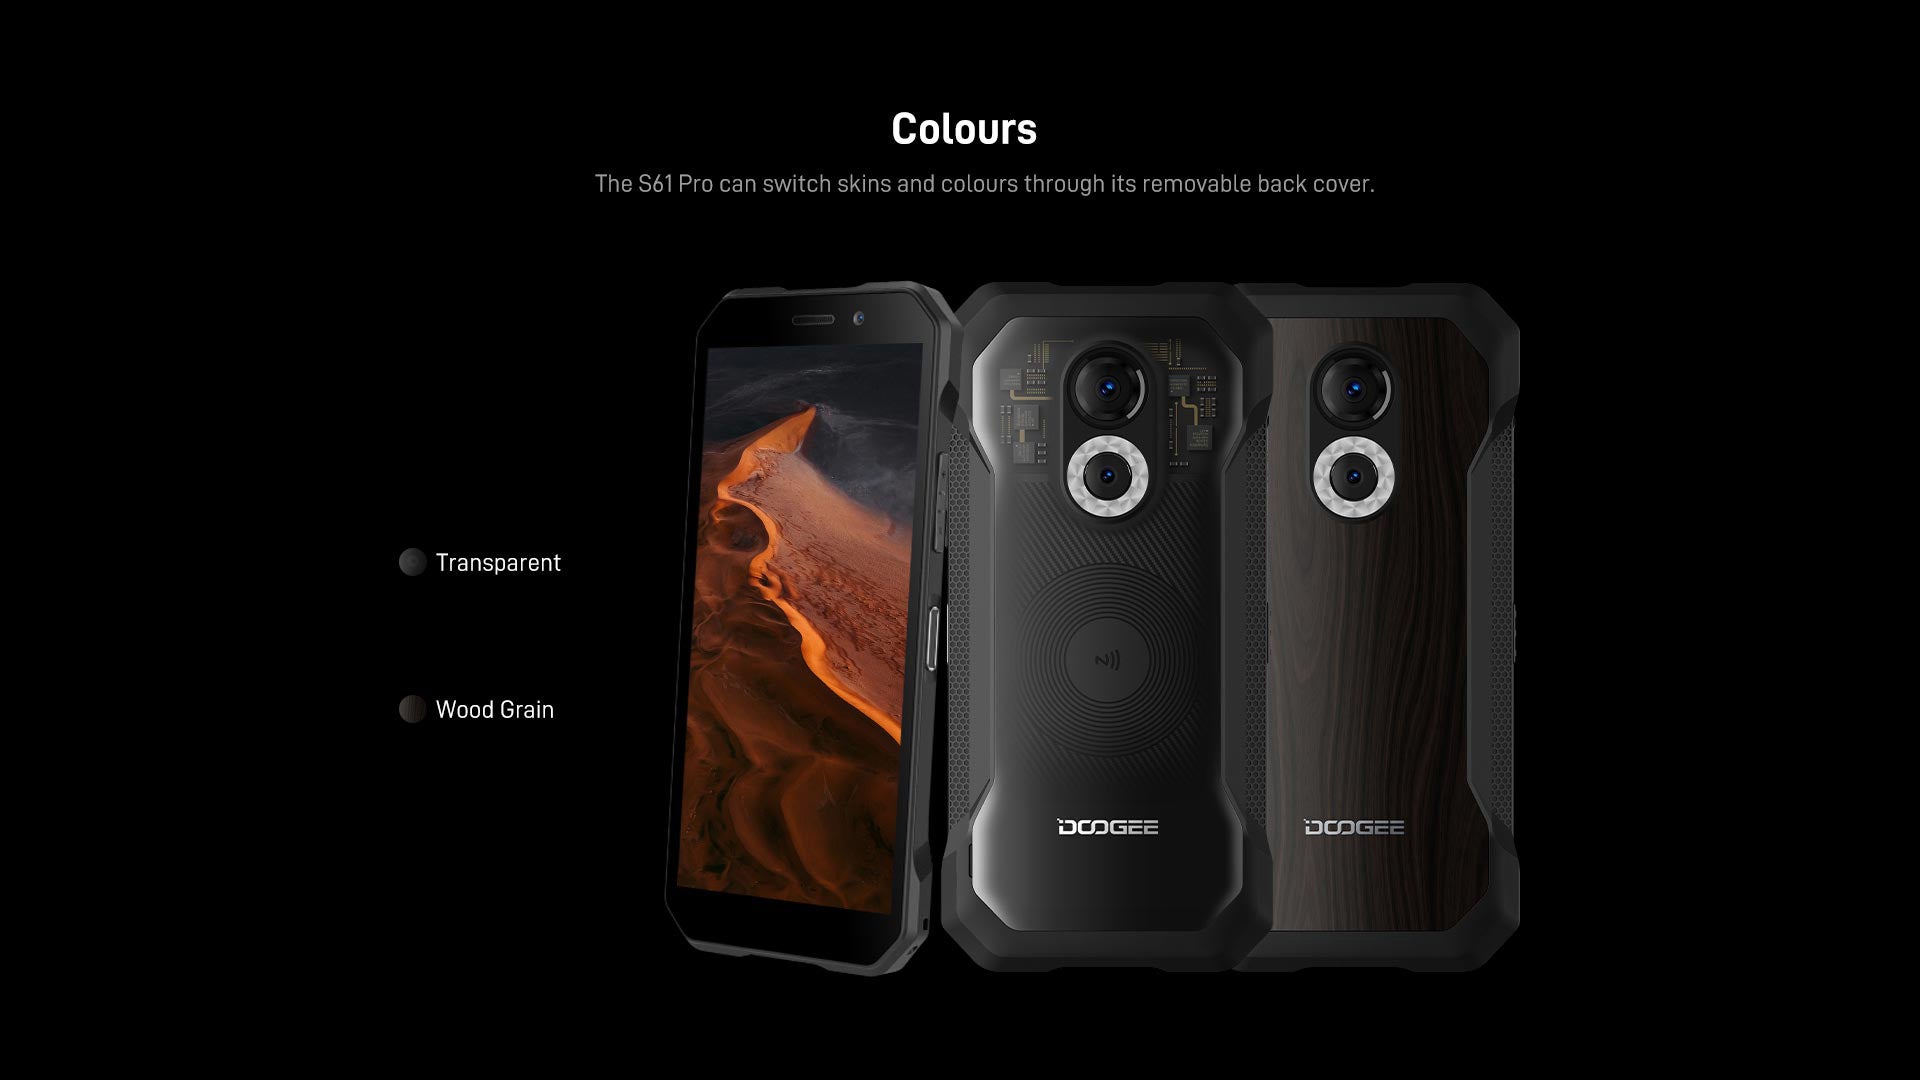 S61 can switch skins and colours through its removable back cover.